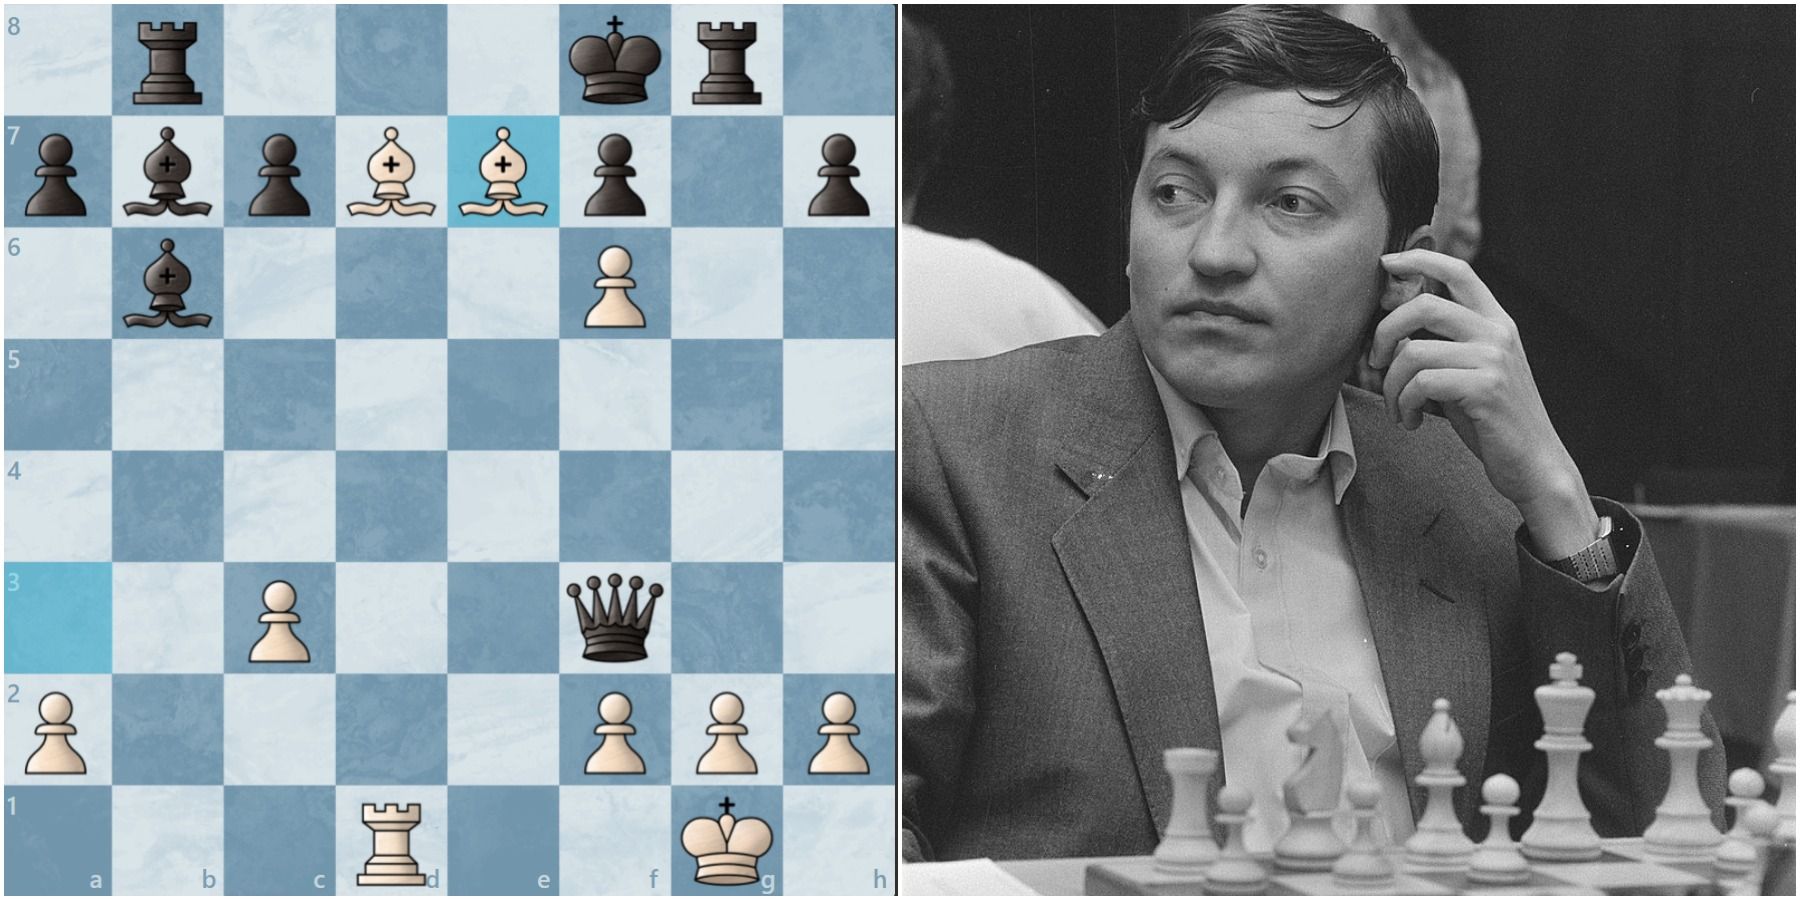 (Left) Evergreen game final position (Right) Karpov playng chess